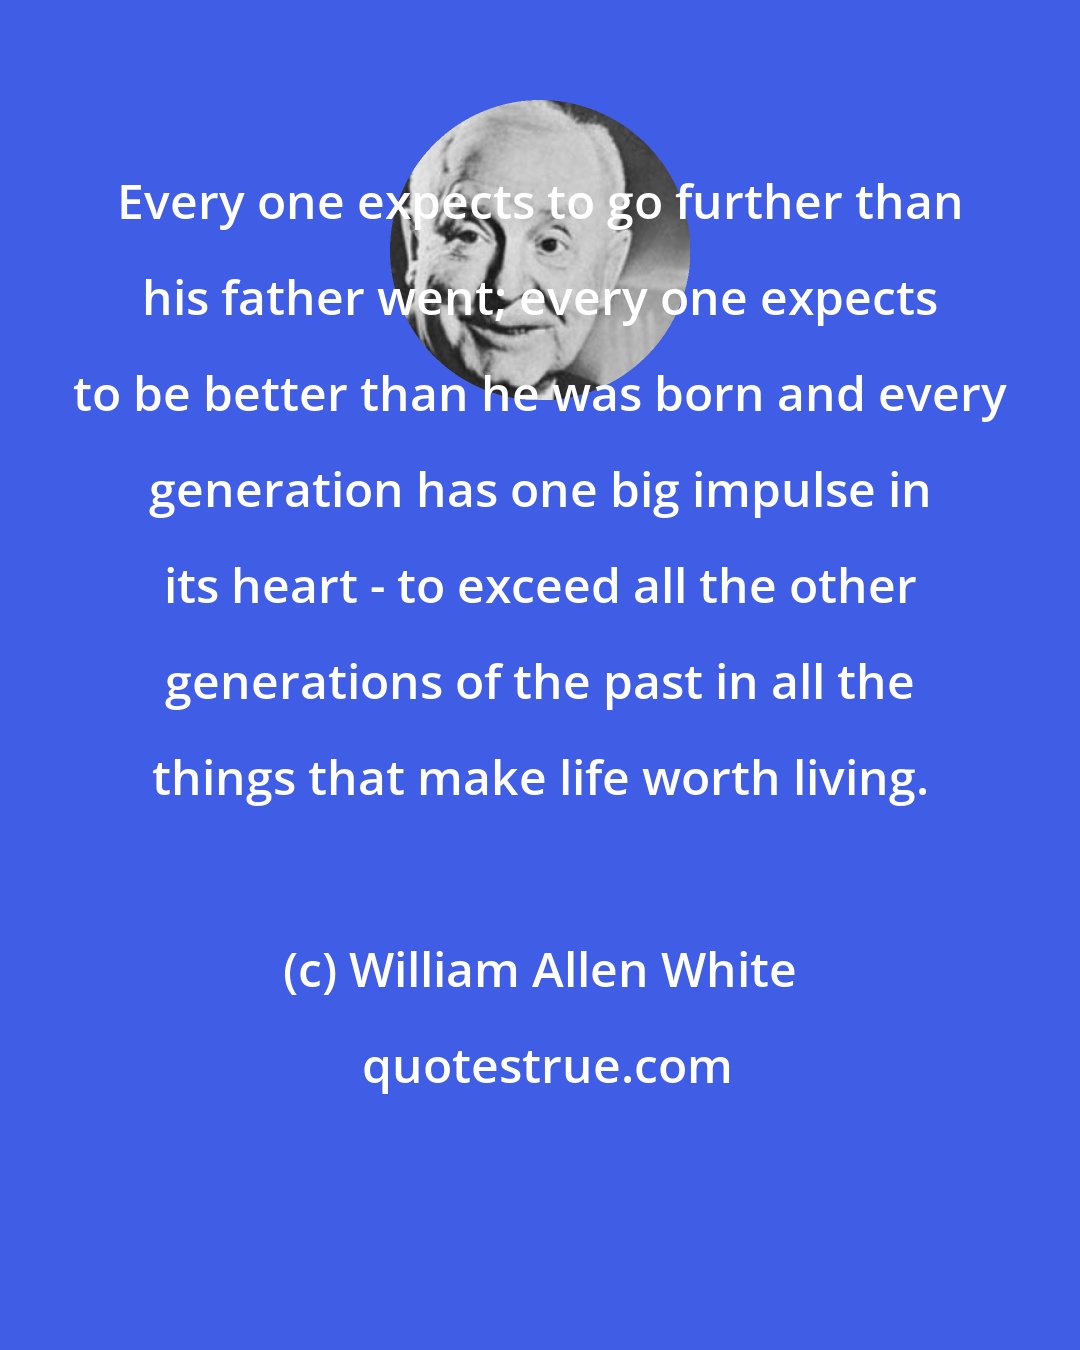 William Allen White: Every one expects to go further than his father went; every one expects to be better than he was born and every generation has one big impulse in its heart - to exceed all the other generations of the past in all the things that make life worth living.